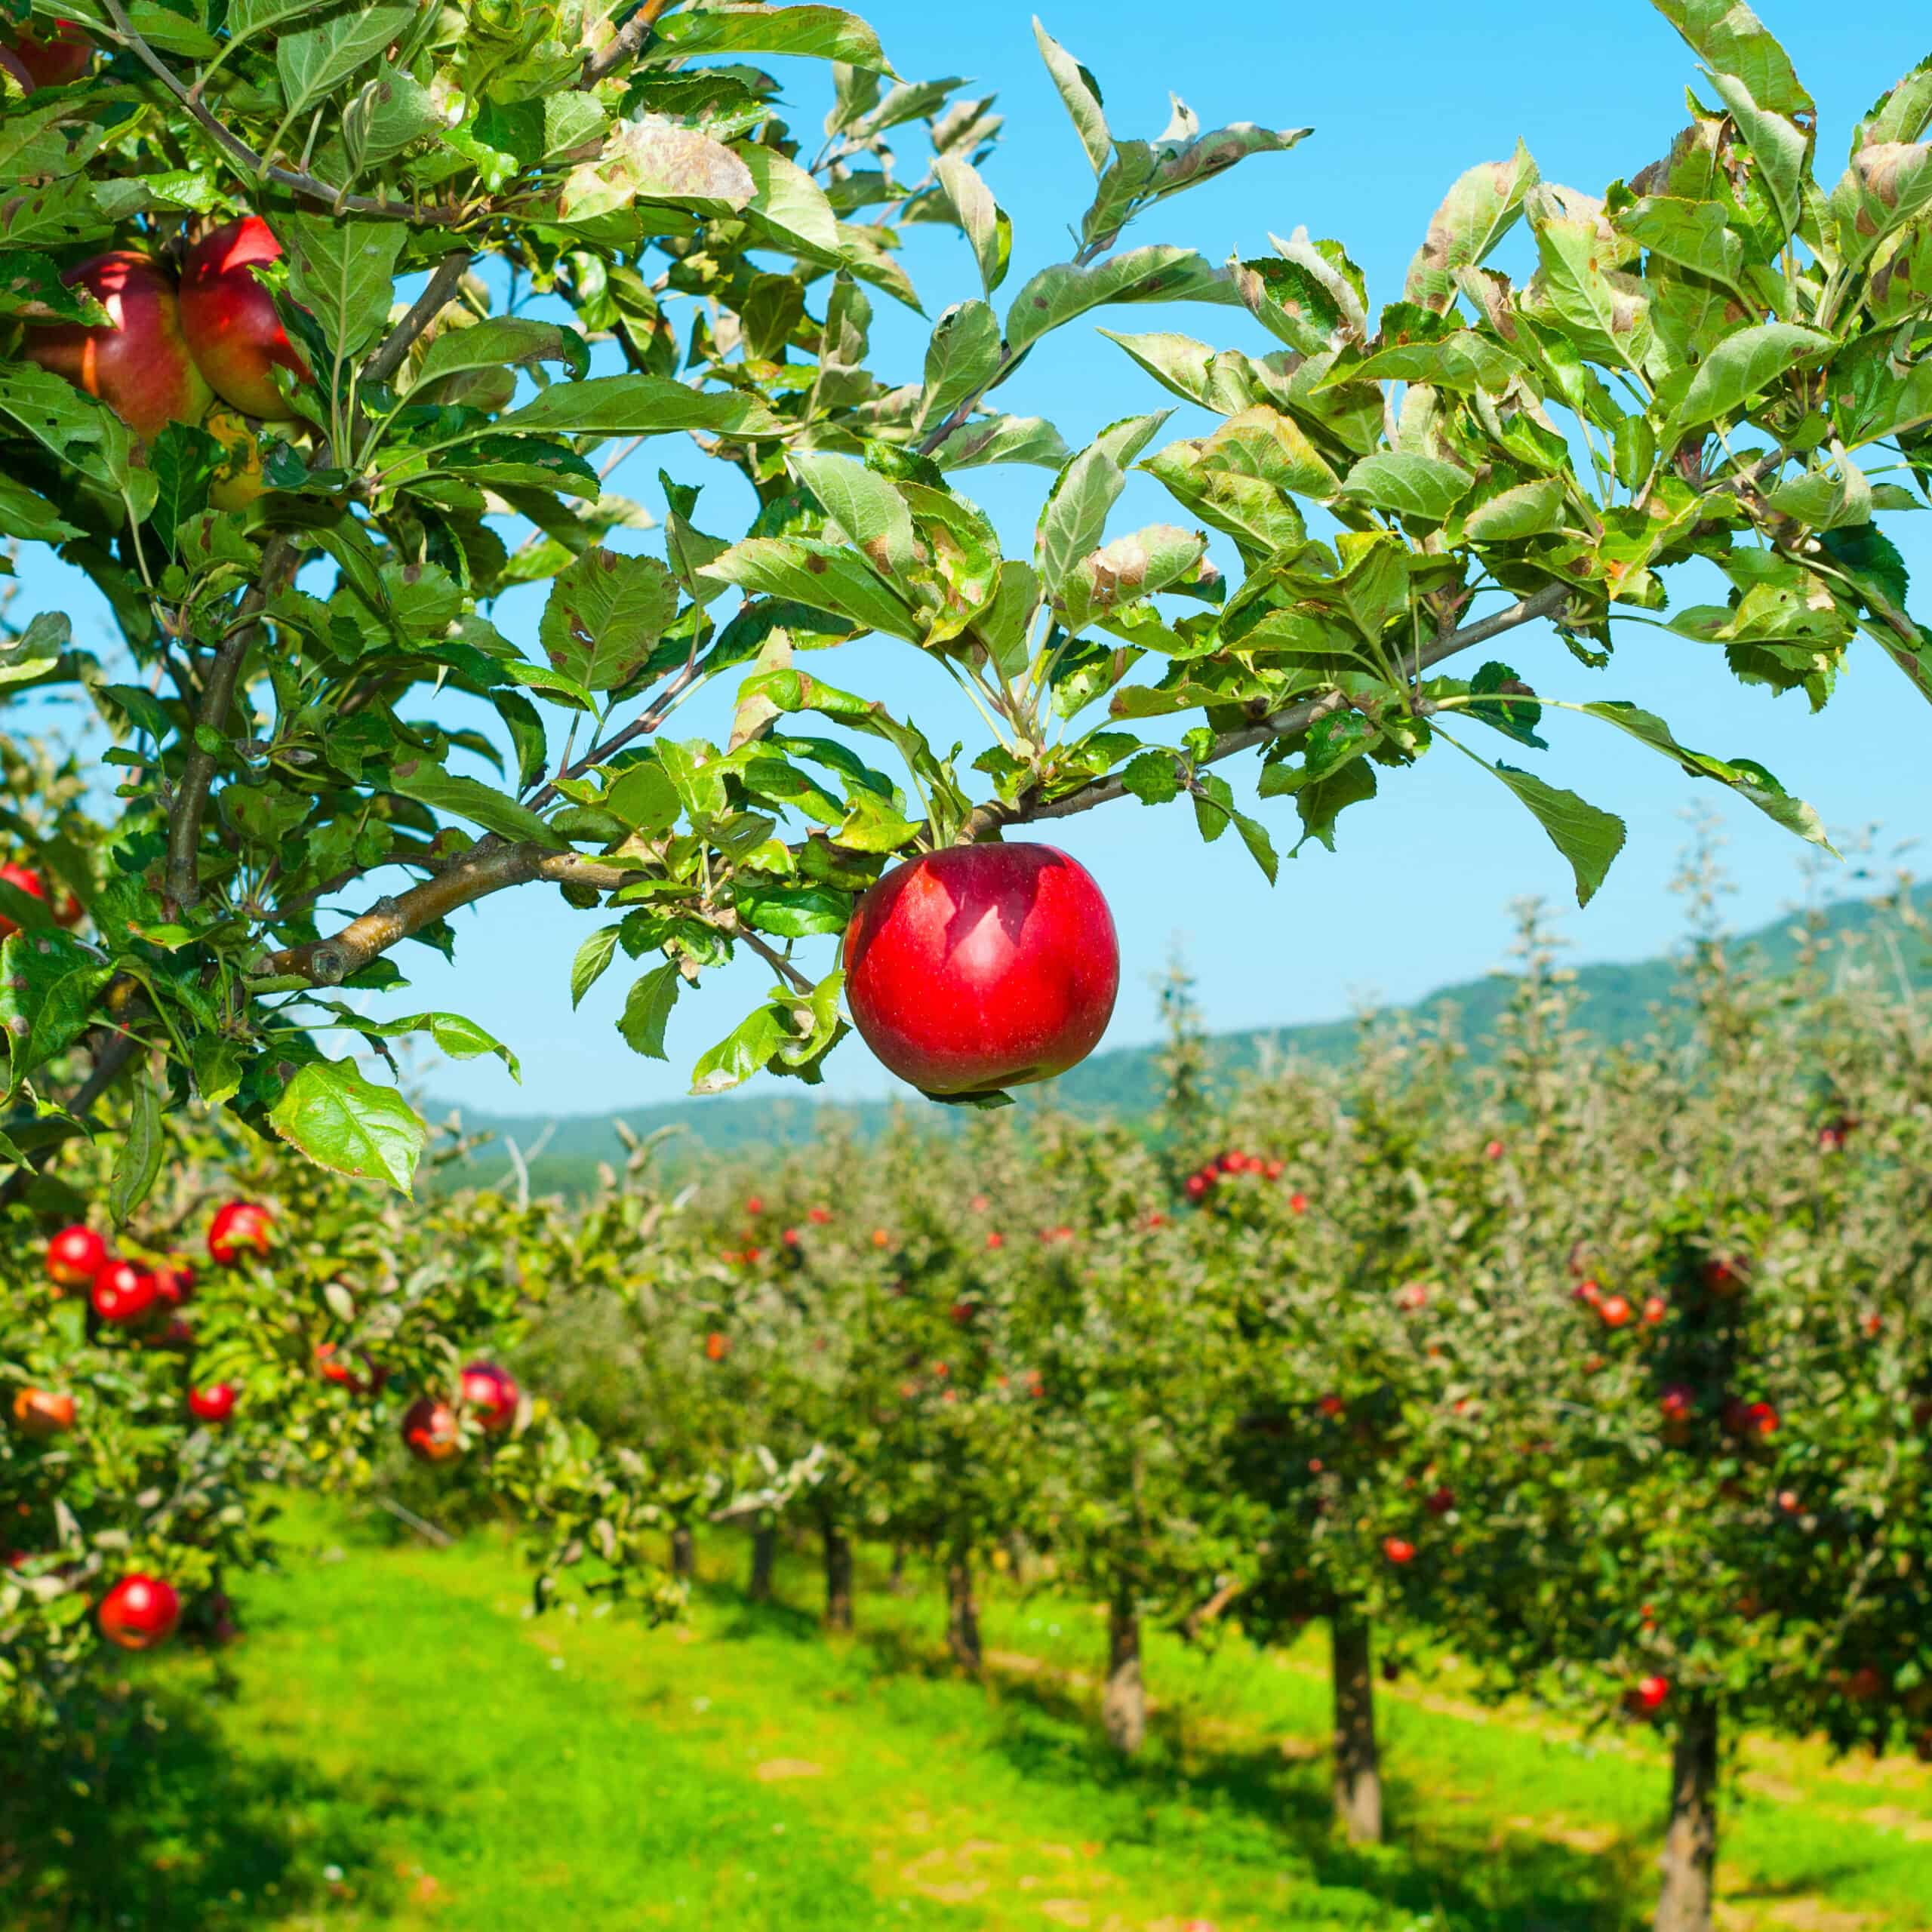 A red apple hangs from a branch in an apple orchard on a sunny day.